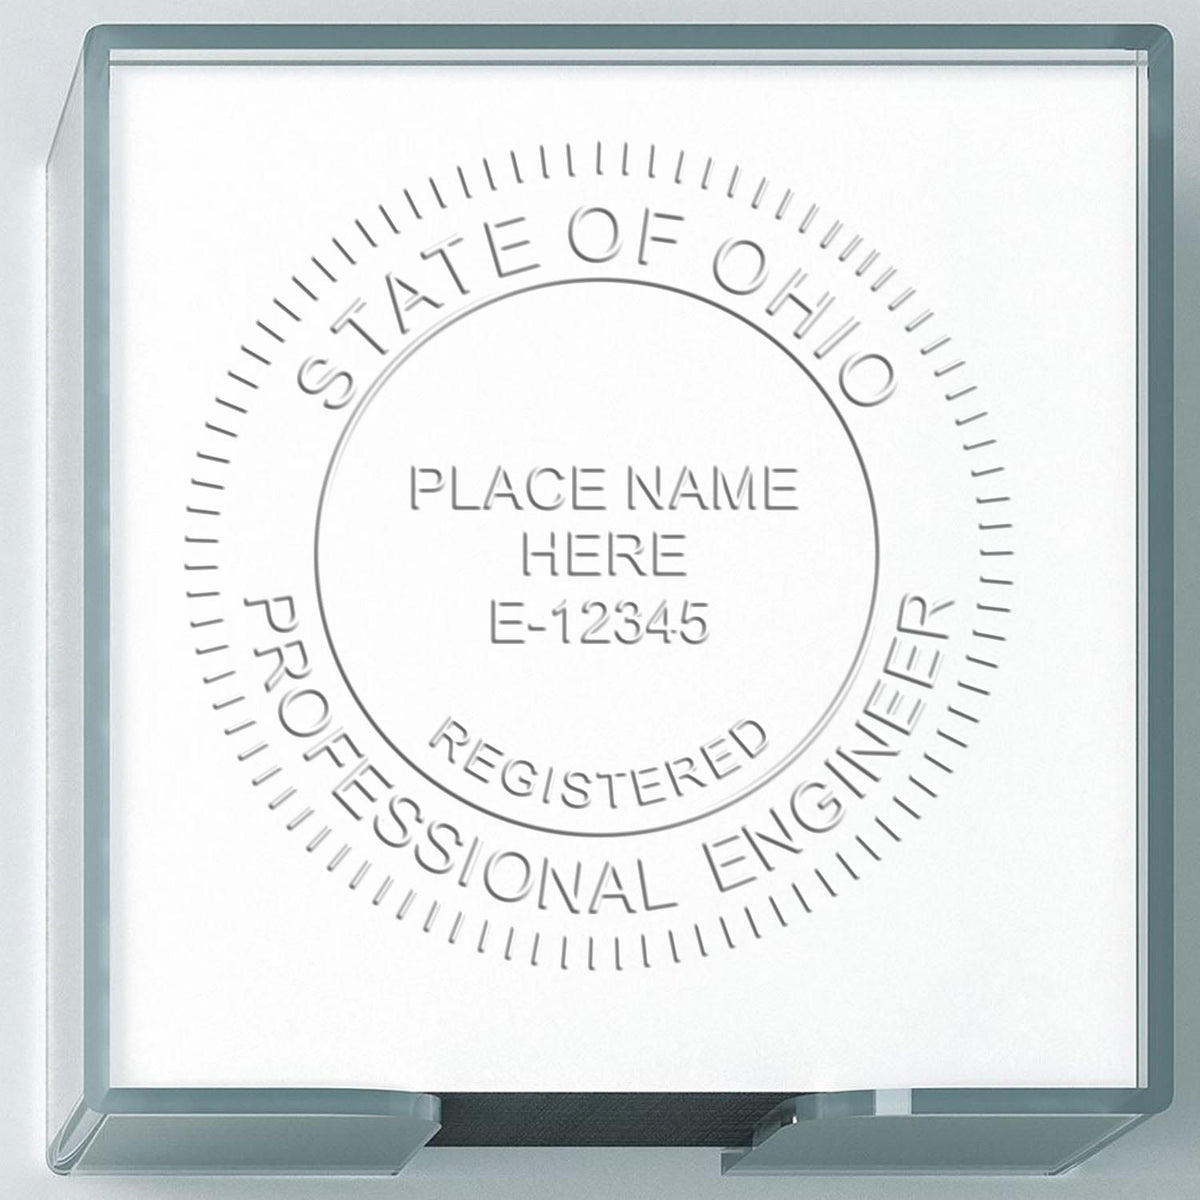 A photograph of the Ohio Engineer Desk Seal stamp impression reveals a vivid, professional image of the on paper.